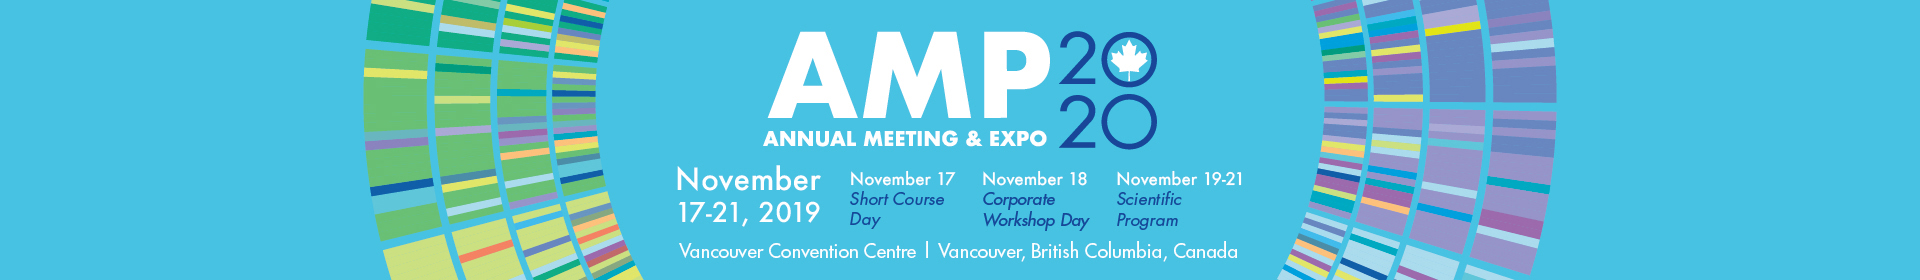 AMP 2020 - Call for Abstracts Event Banner